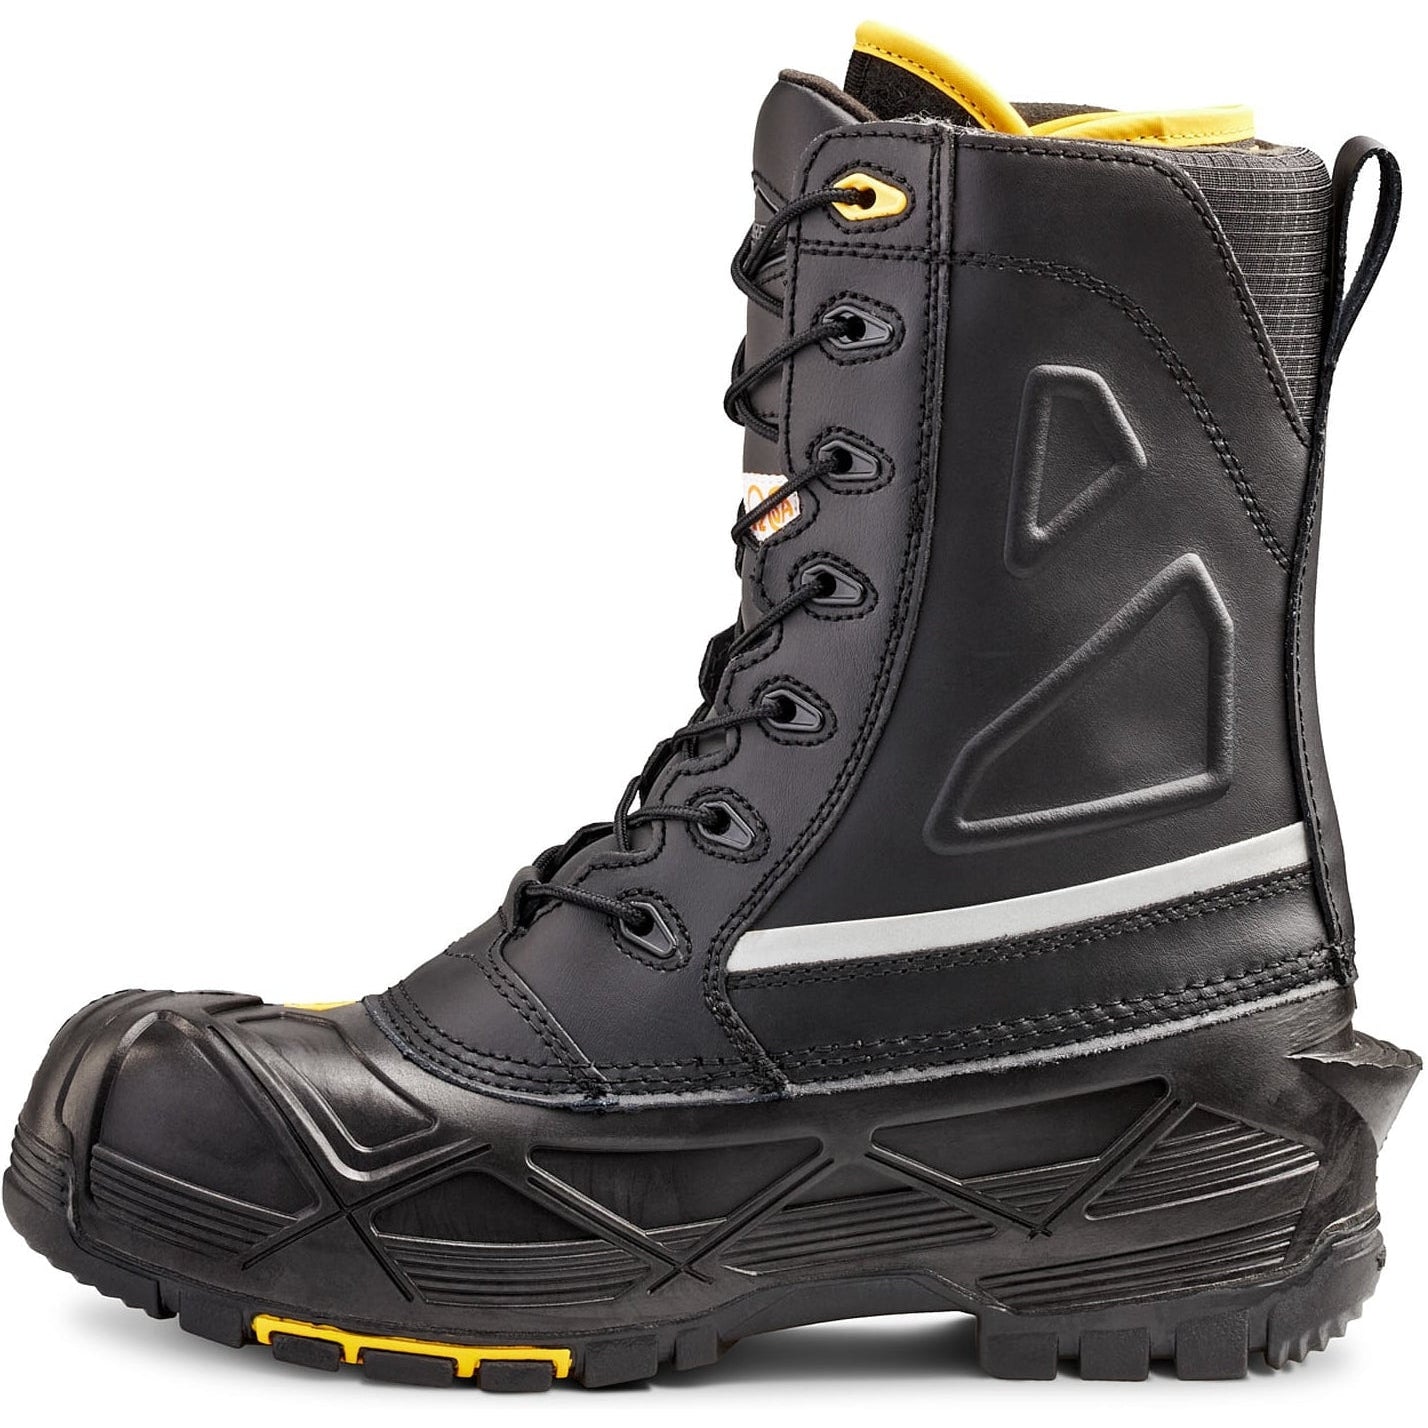 Terra Men's Crossbow Comp Toe WP Winter Safety Work Boot -Black- R5605B  - Overlook Boots